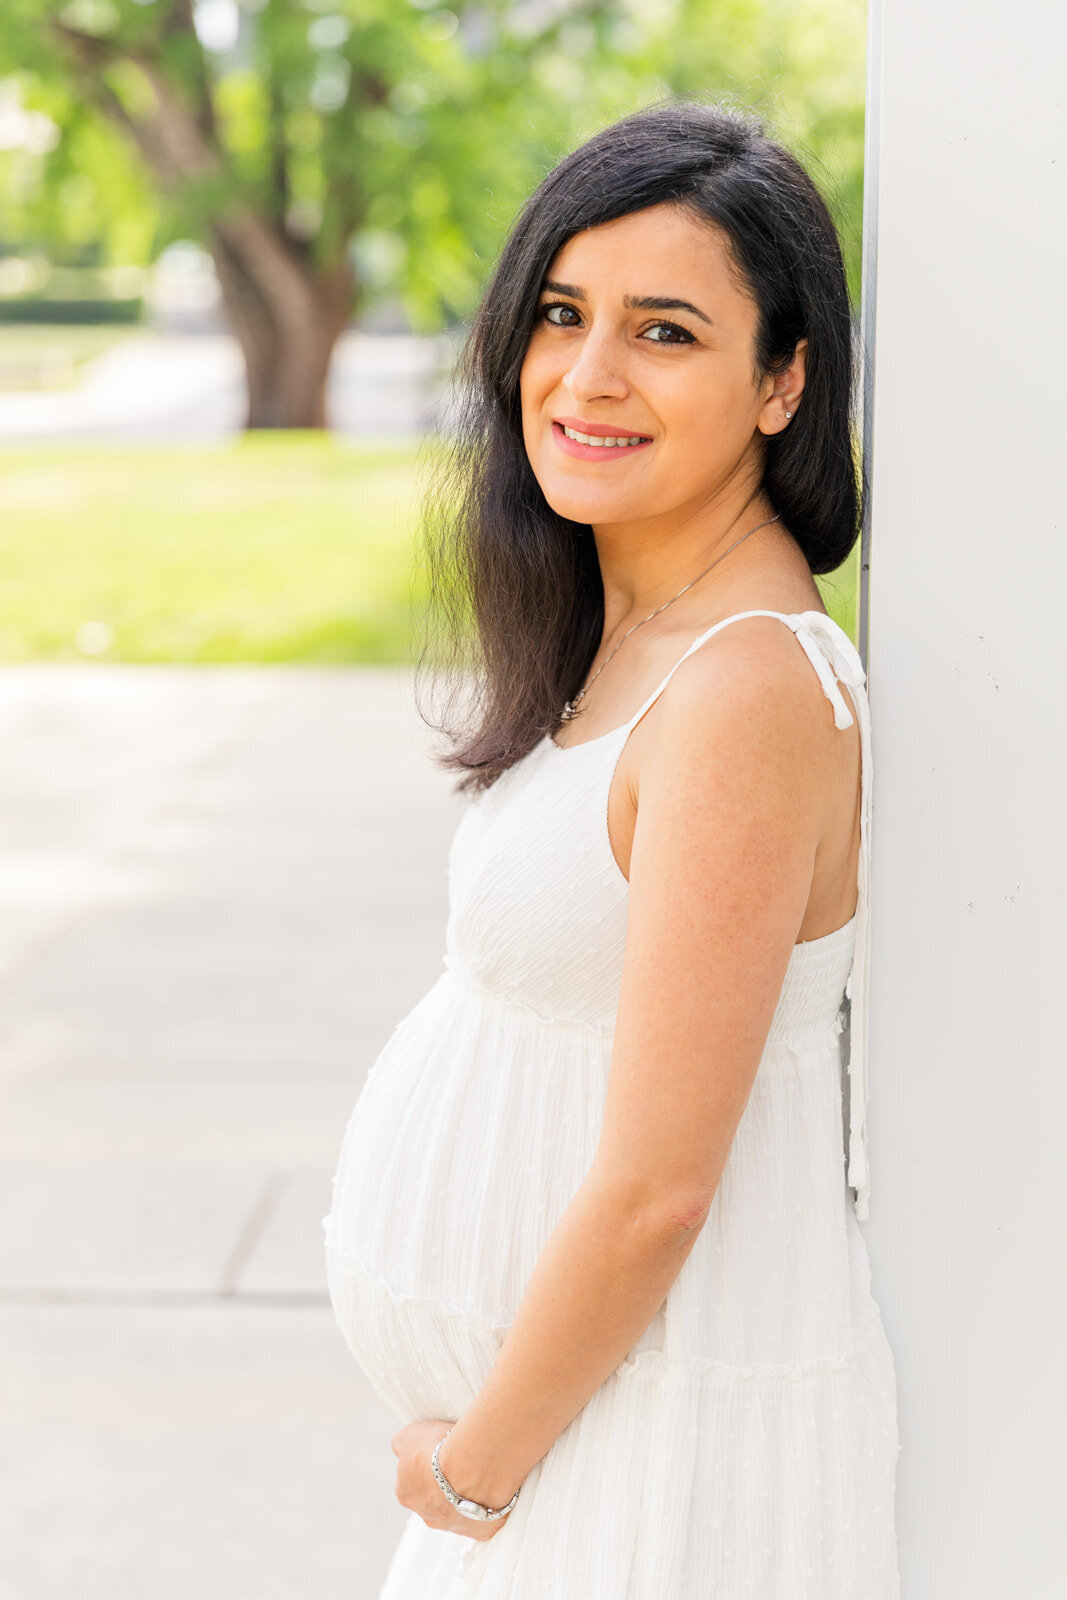 maternity pregnant woman with white dress leaning against a wall